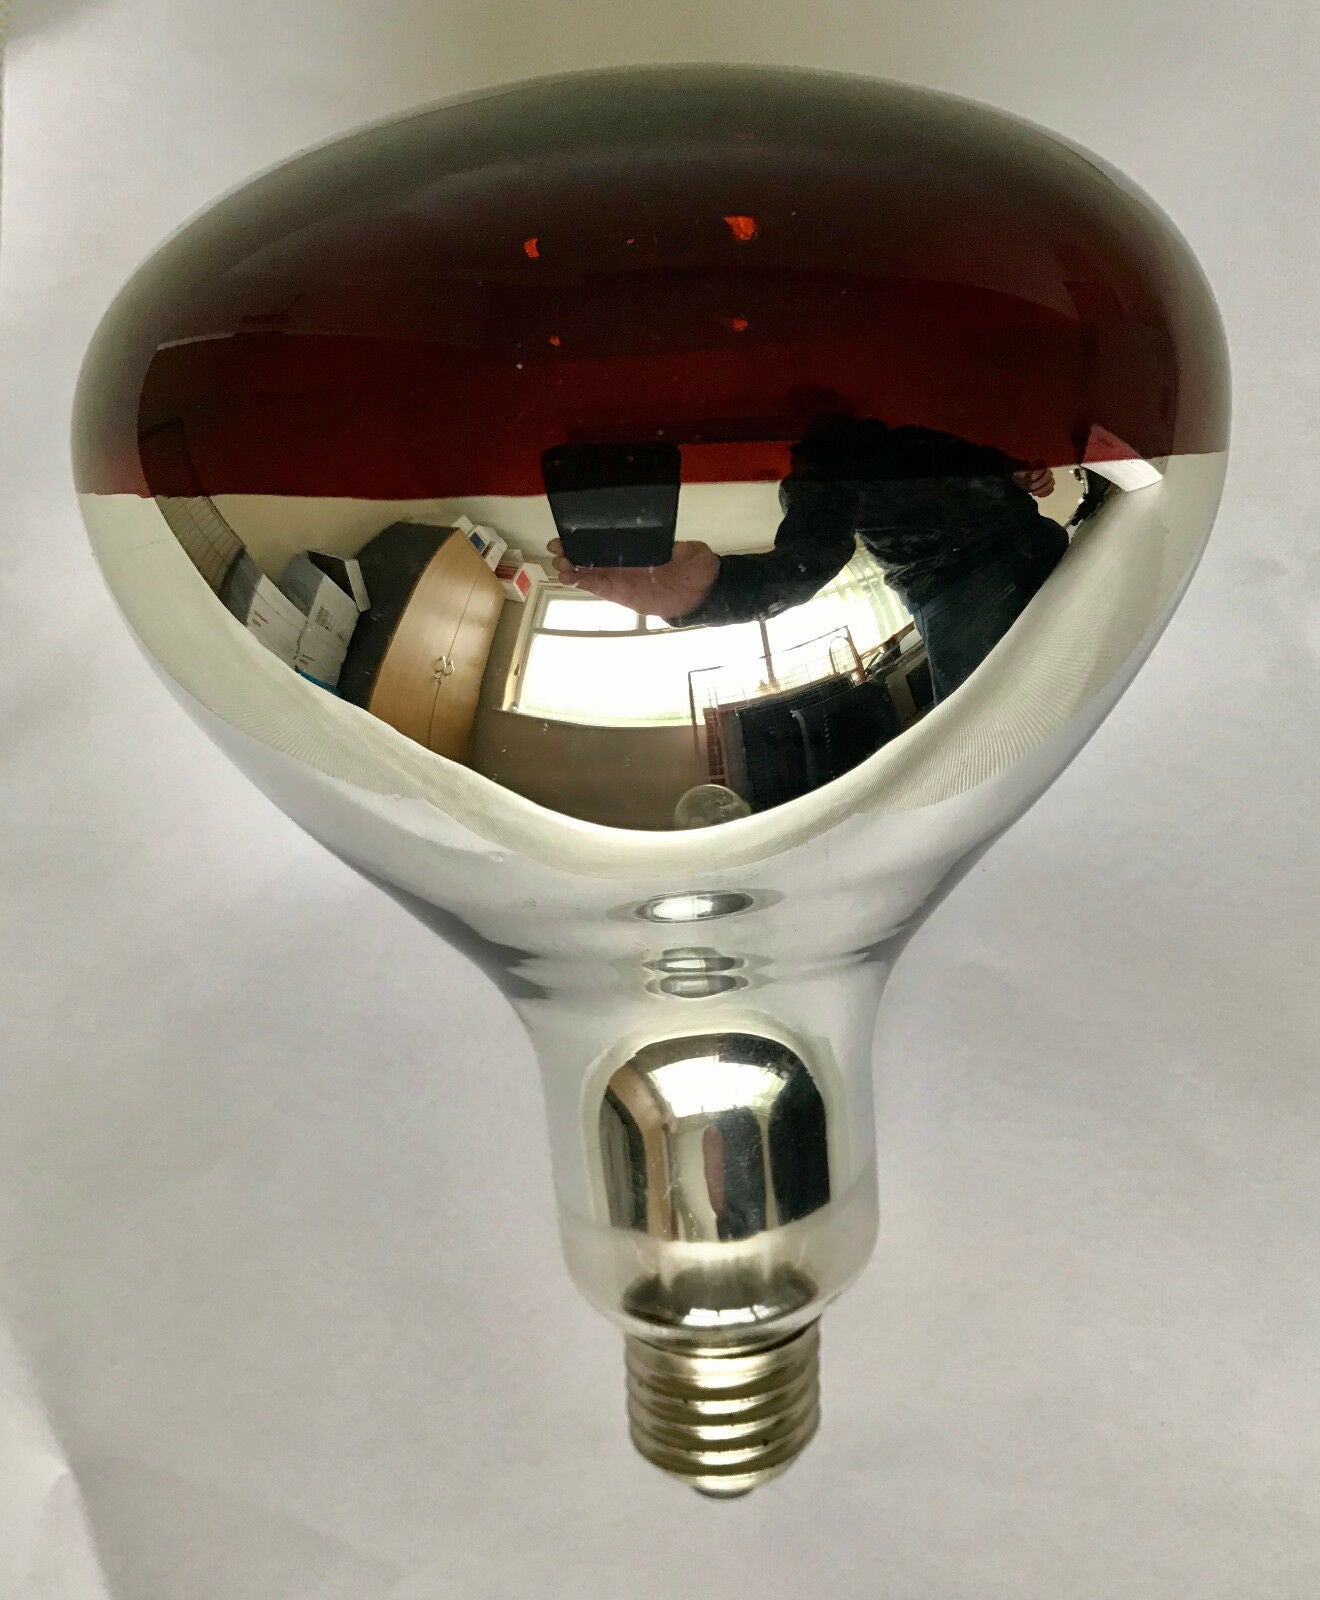 Infrared heat lamp (special sale).